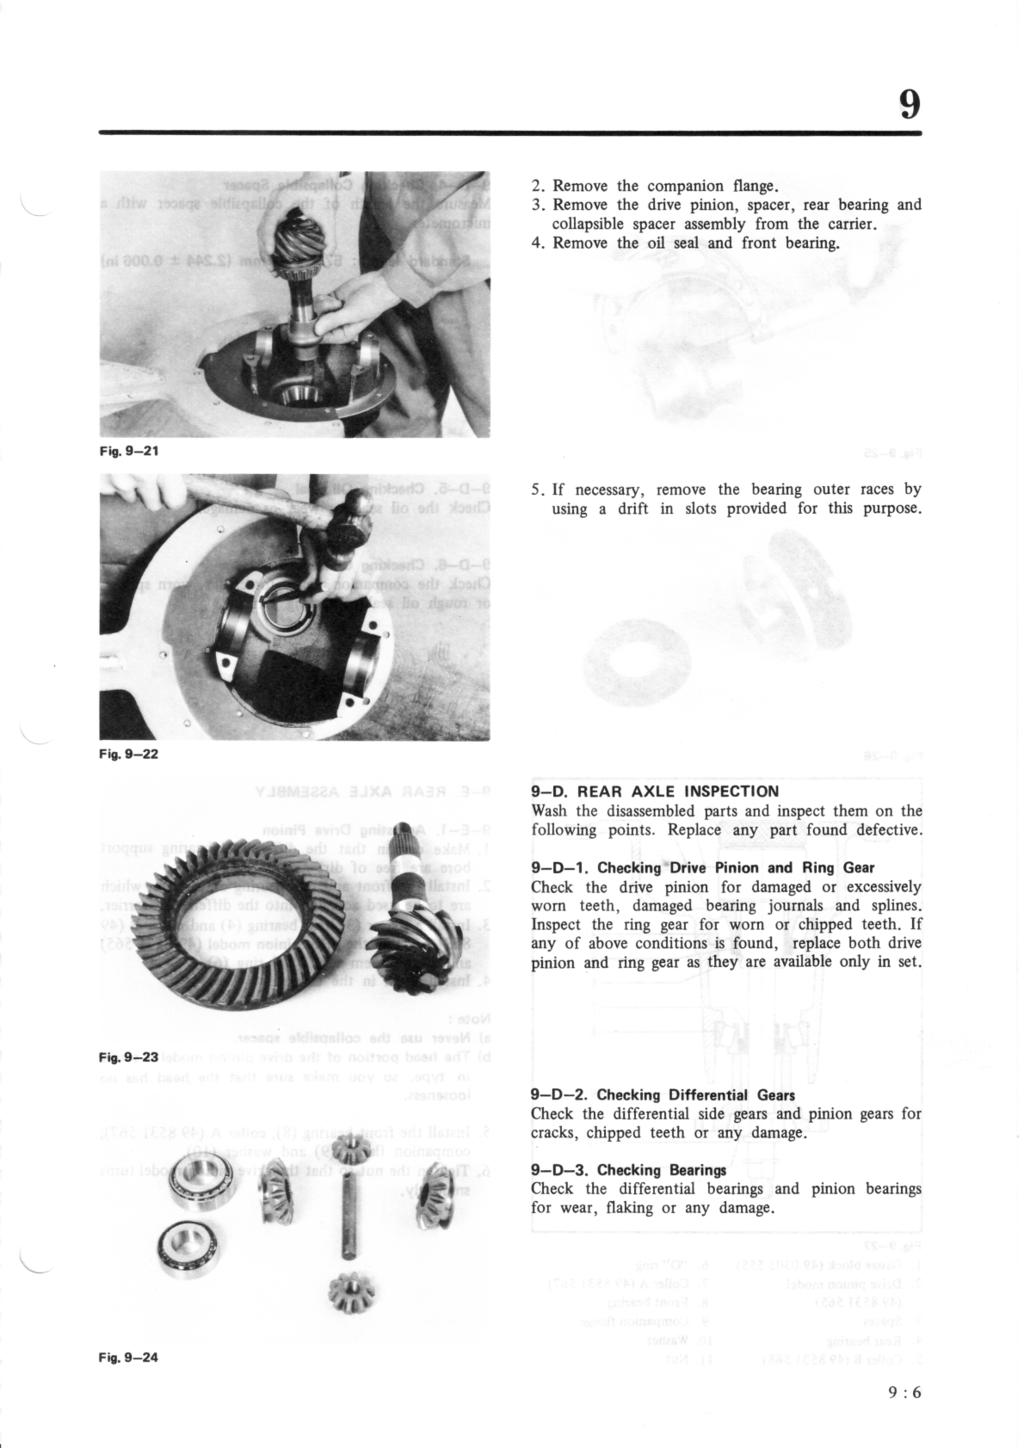 ~~ - 9-2. Remove the companion flange. 3. Remove the drive pinion, spacer, rear bearing and collapsible spacer assembly from the carrier. 4. Remove the oil seal and front bearing. Fig. 9-21 - Pk.